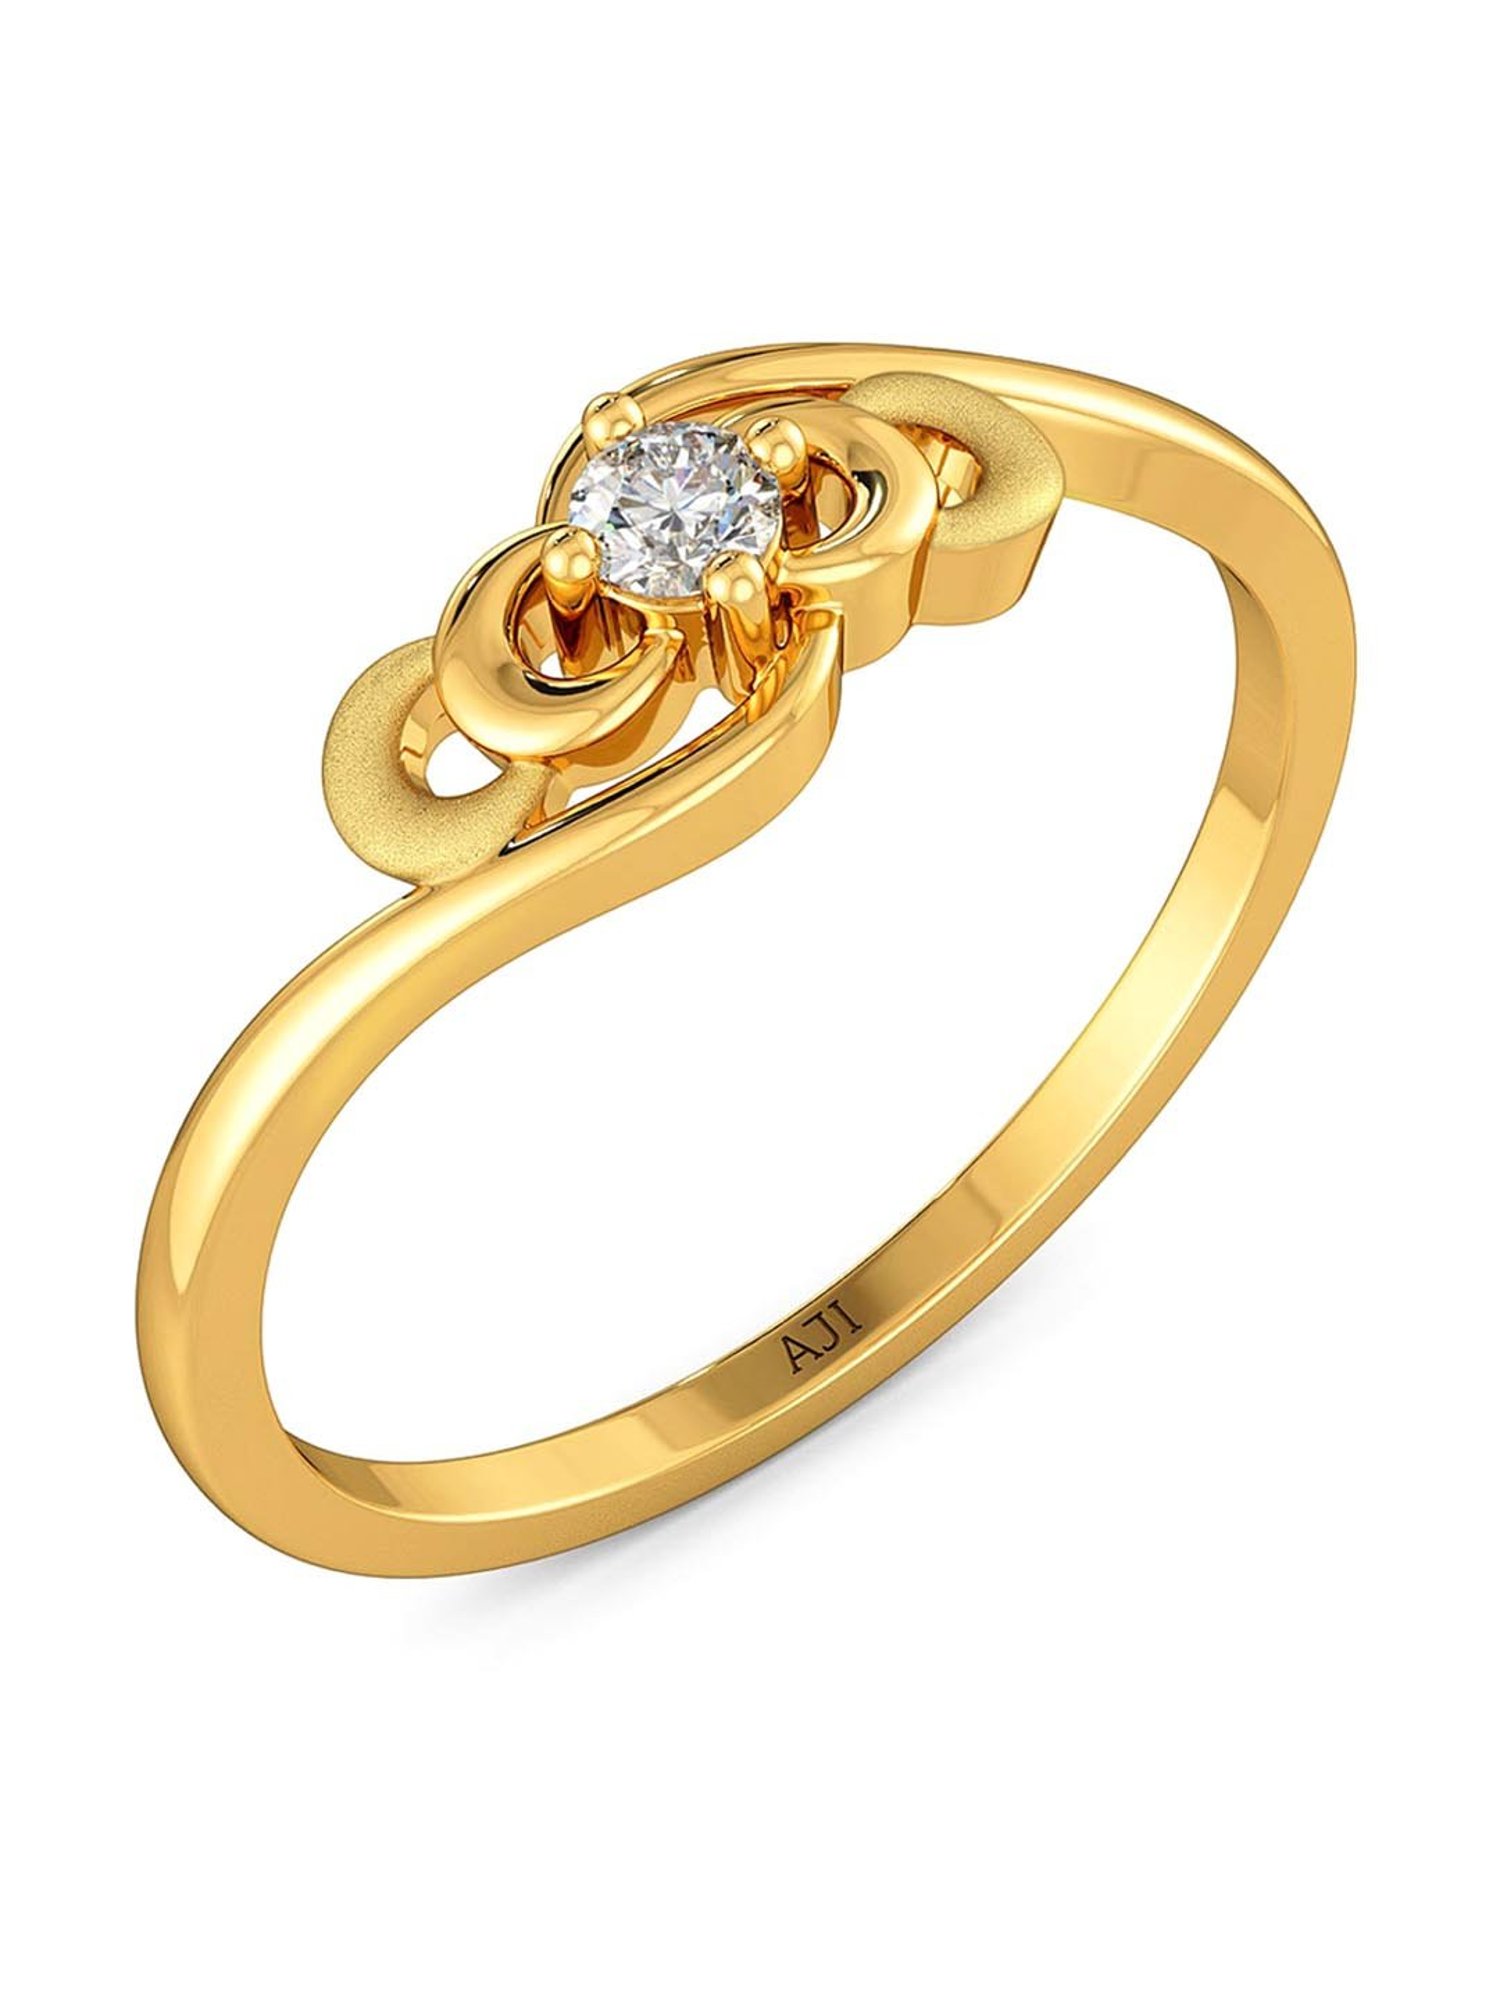 Buy quality 18kt Bedazzling Rose Gold Diamond Ring For Women in Pune